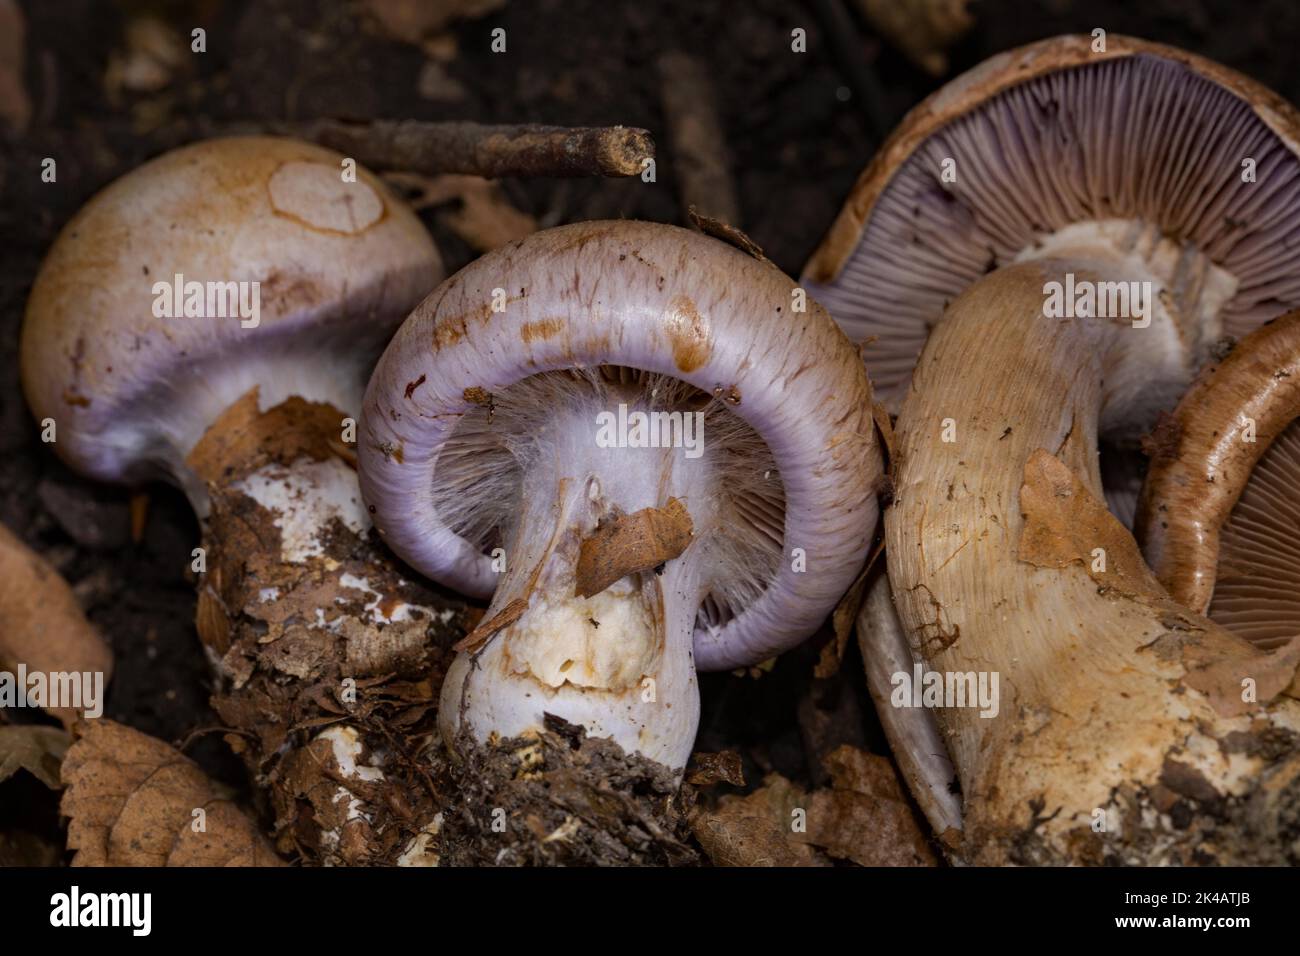 Discolouring slime head three fruiting bodies with whitish-purple stems and brown-purple caps Stock Photo